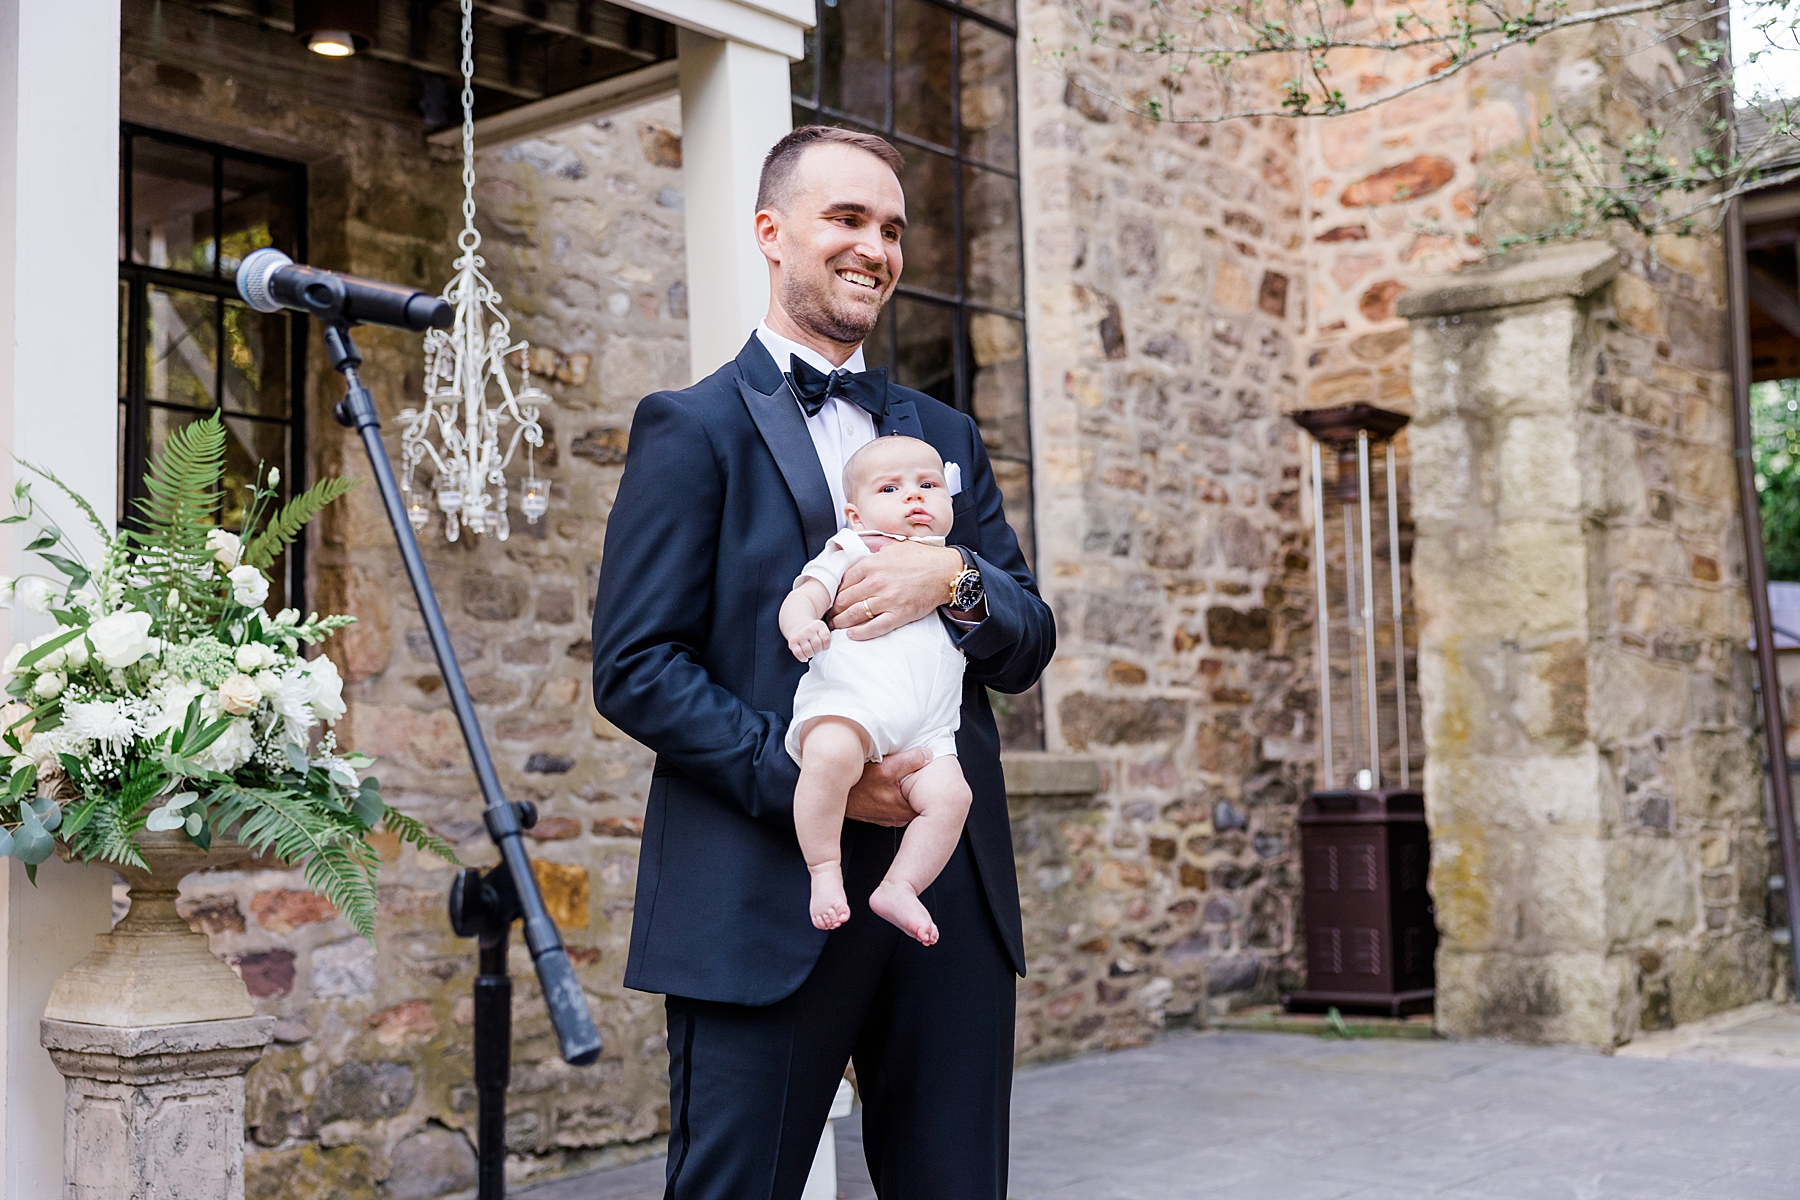 groom holding infant son at wedding ceremony